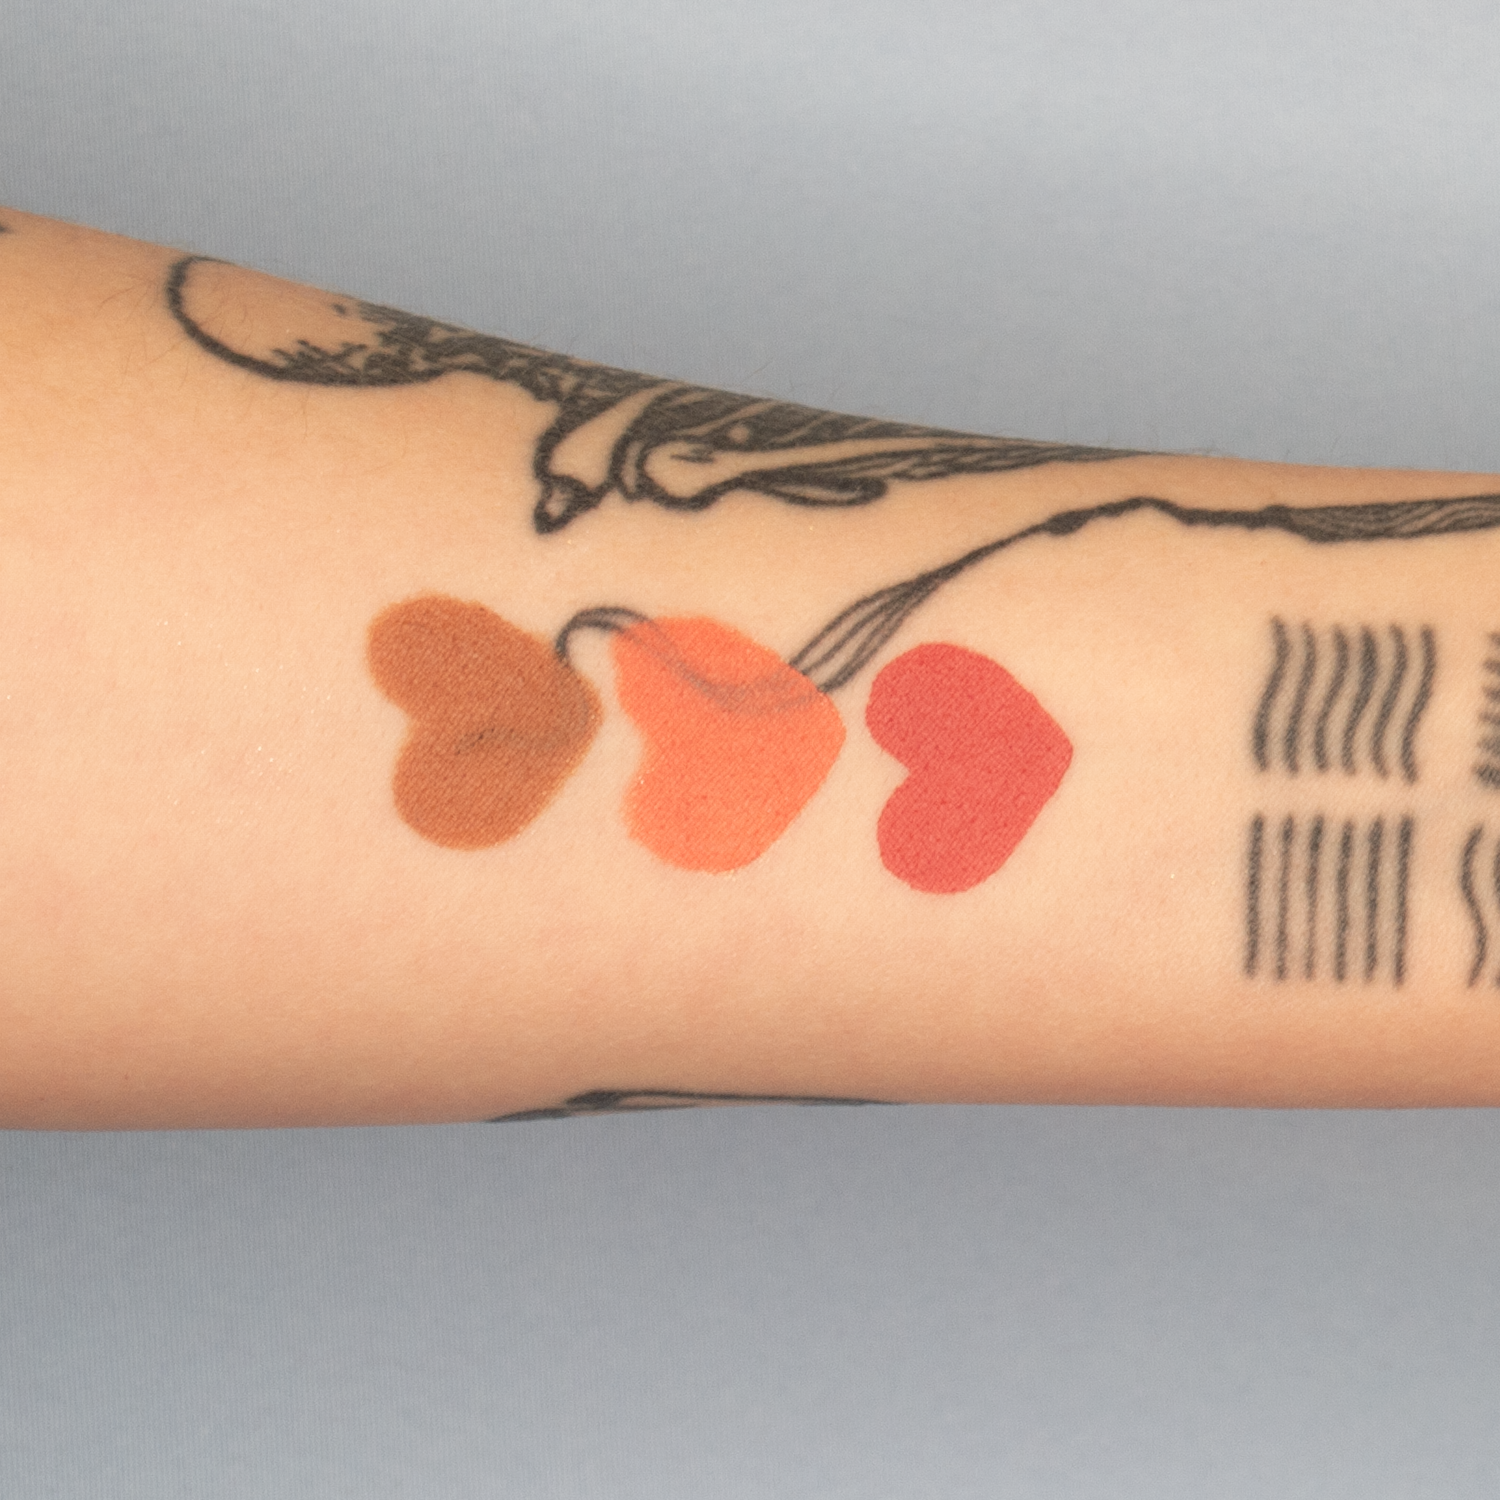 Swatch of colors Confident Coral, Brilliant Bronze and Restful Rose in heart shape on tattooed fair skin